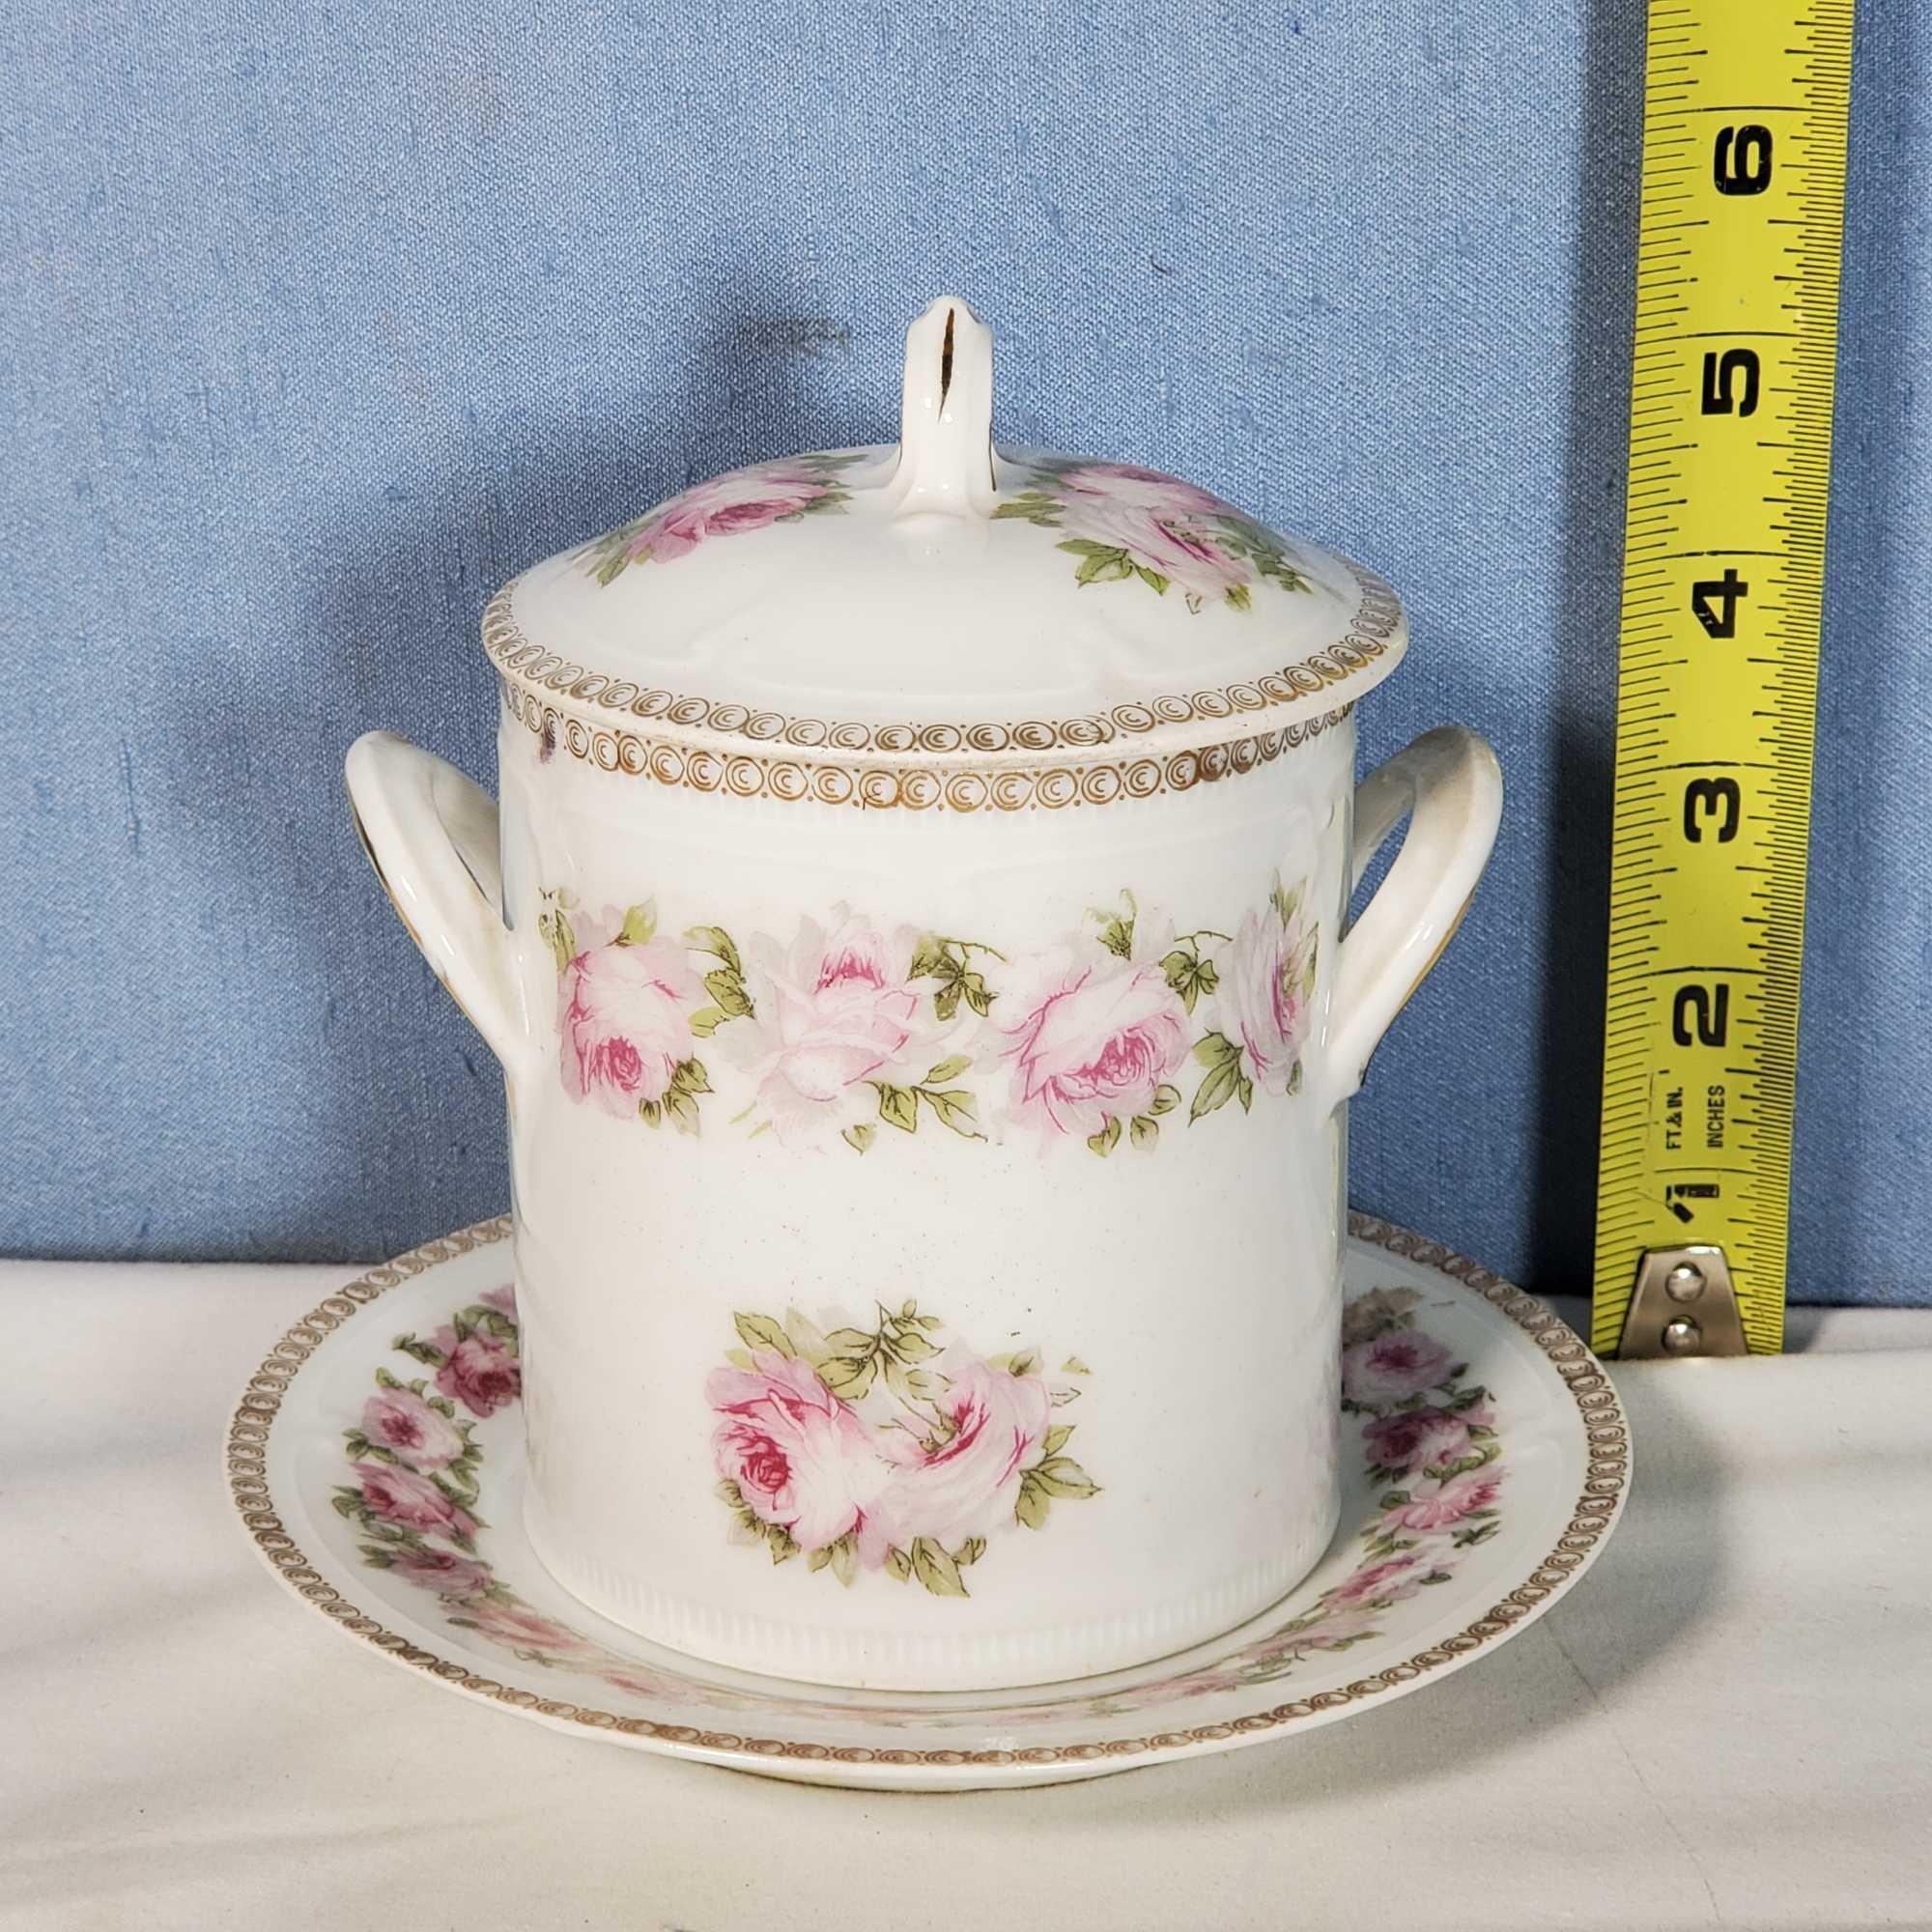 6 Pcs RS Prussia and German Porcelains